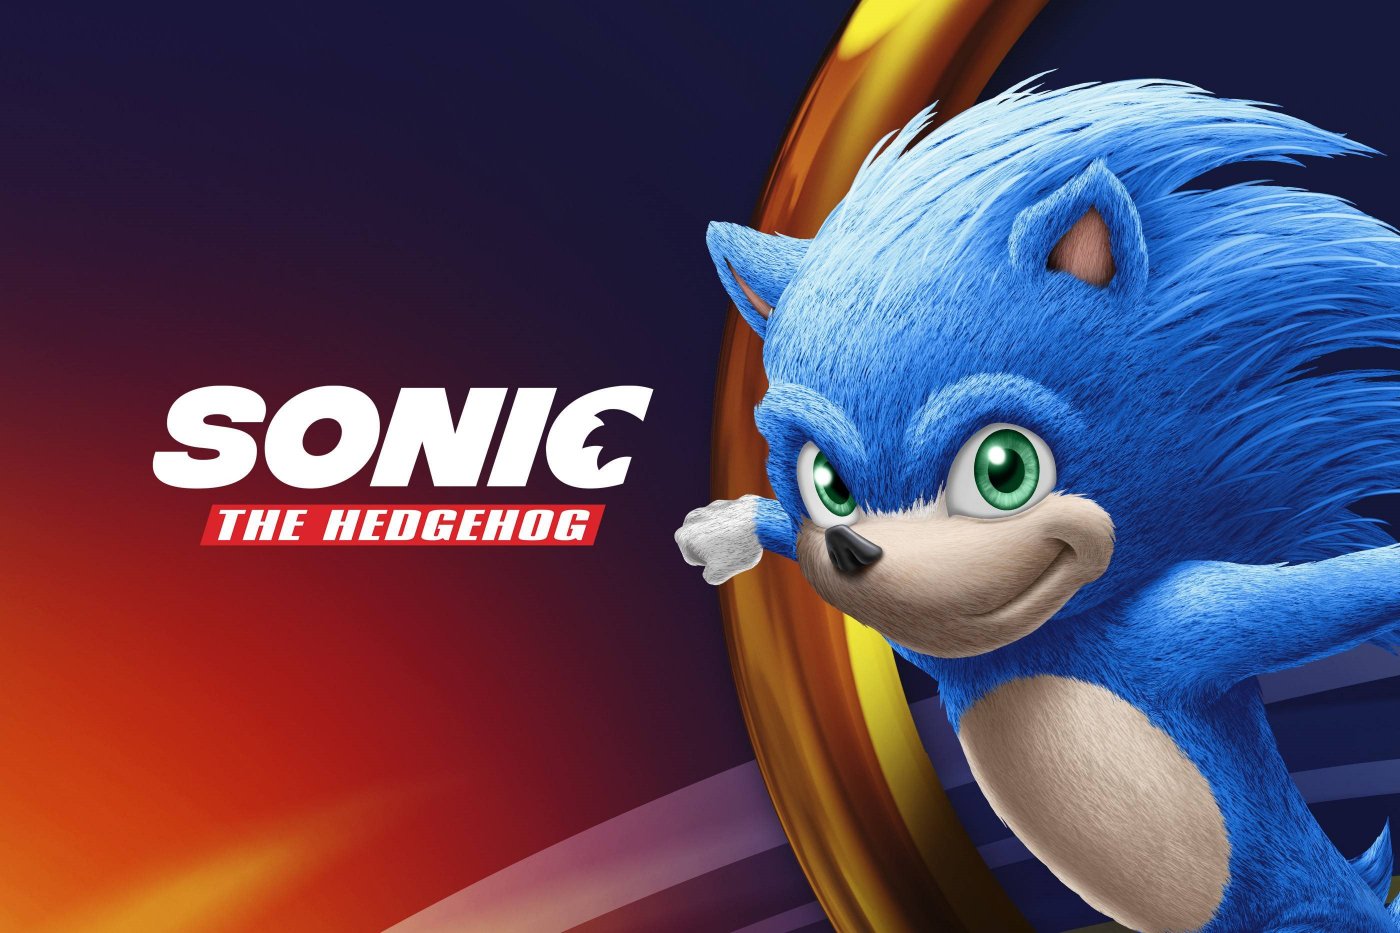 The new Sonic